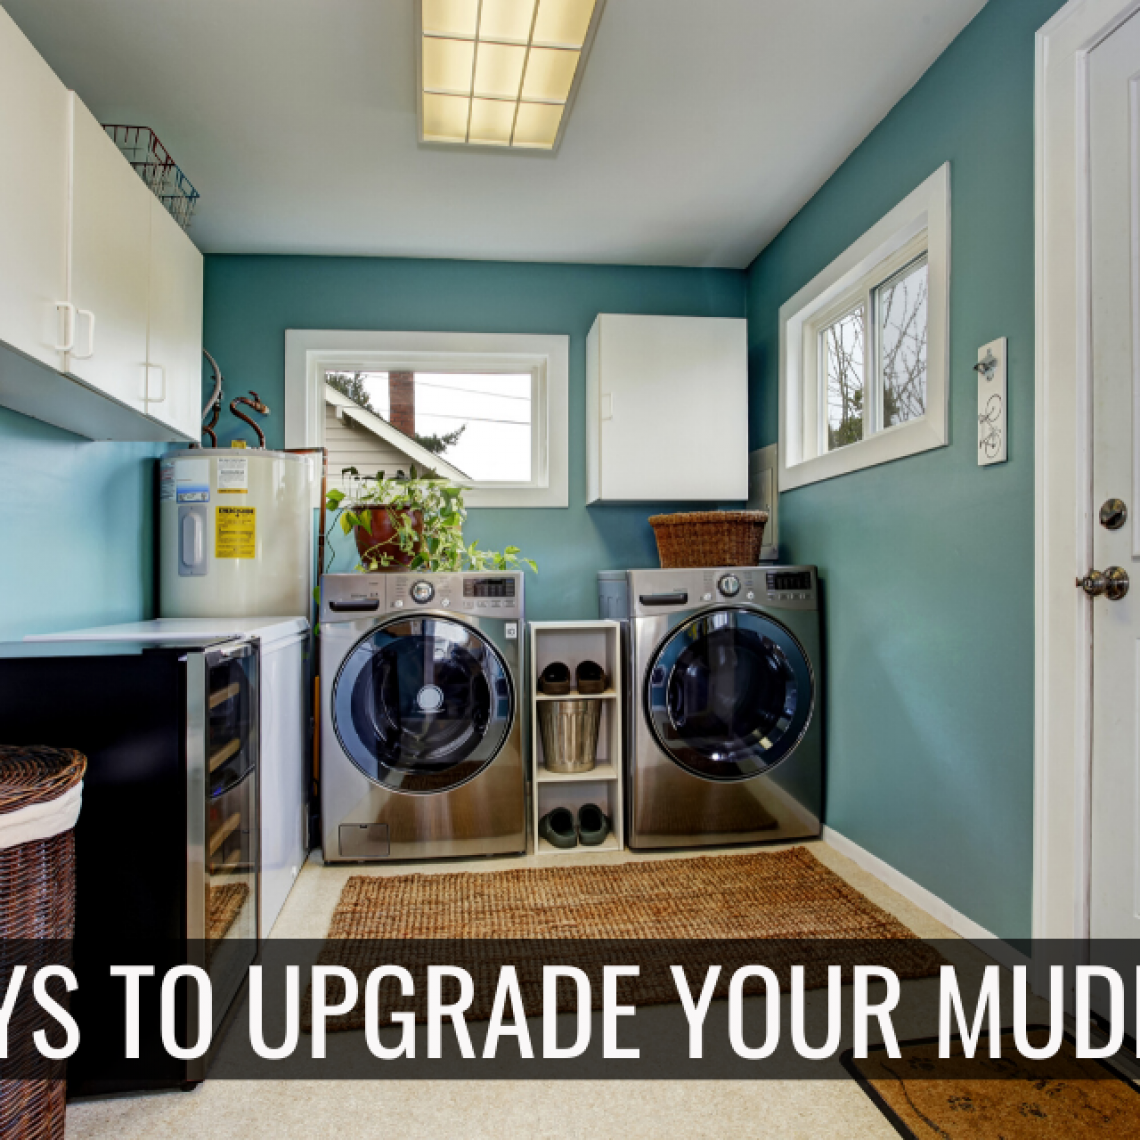 Four ways to upgrade your mudroom